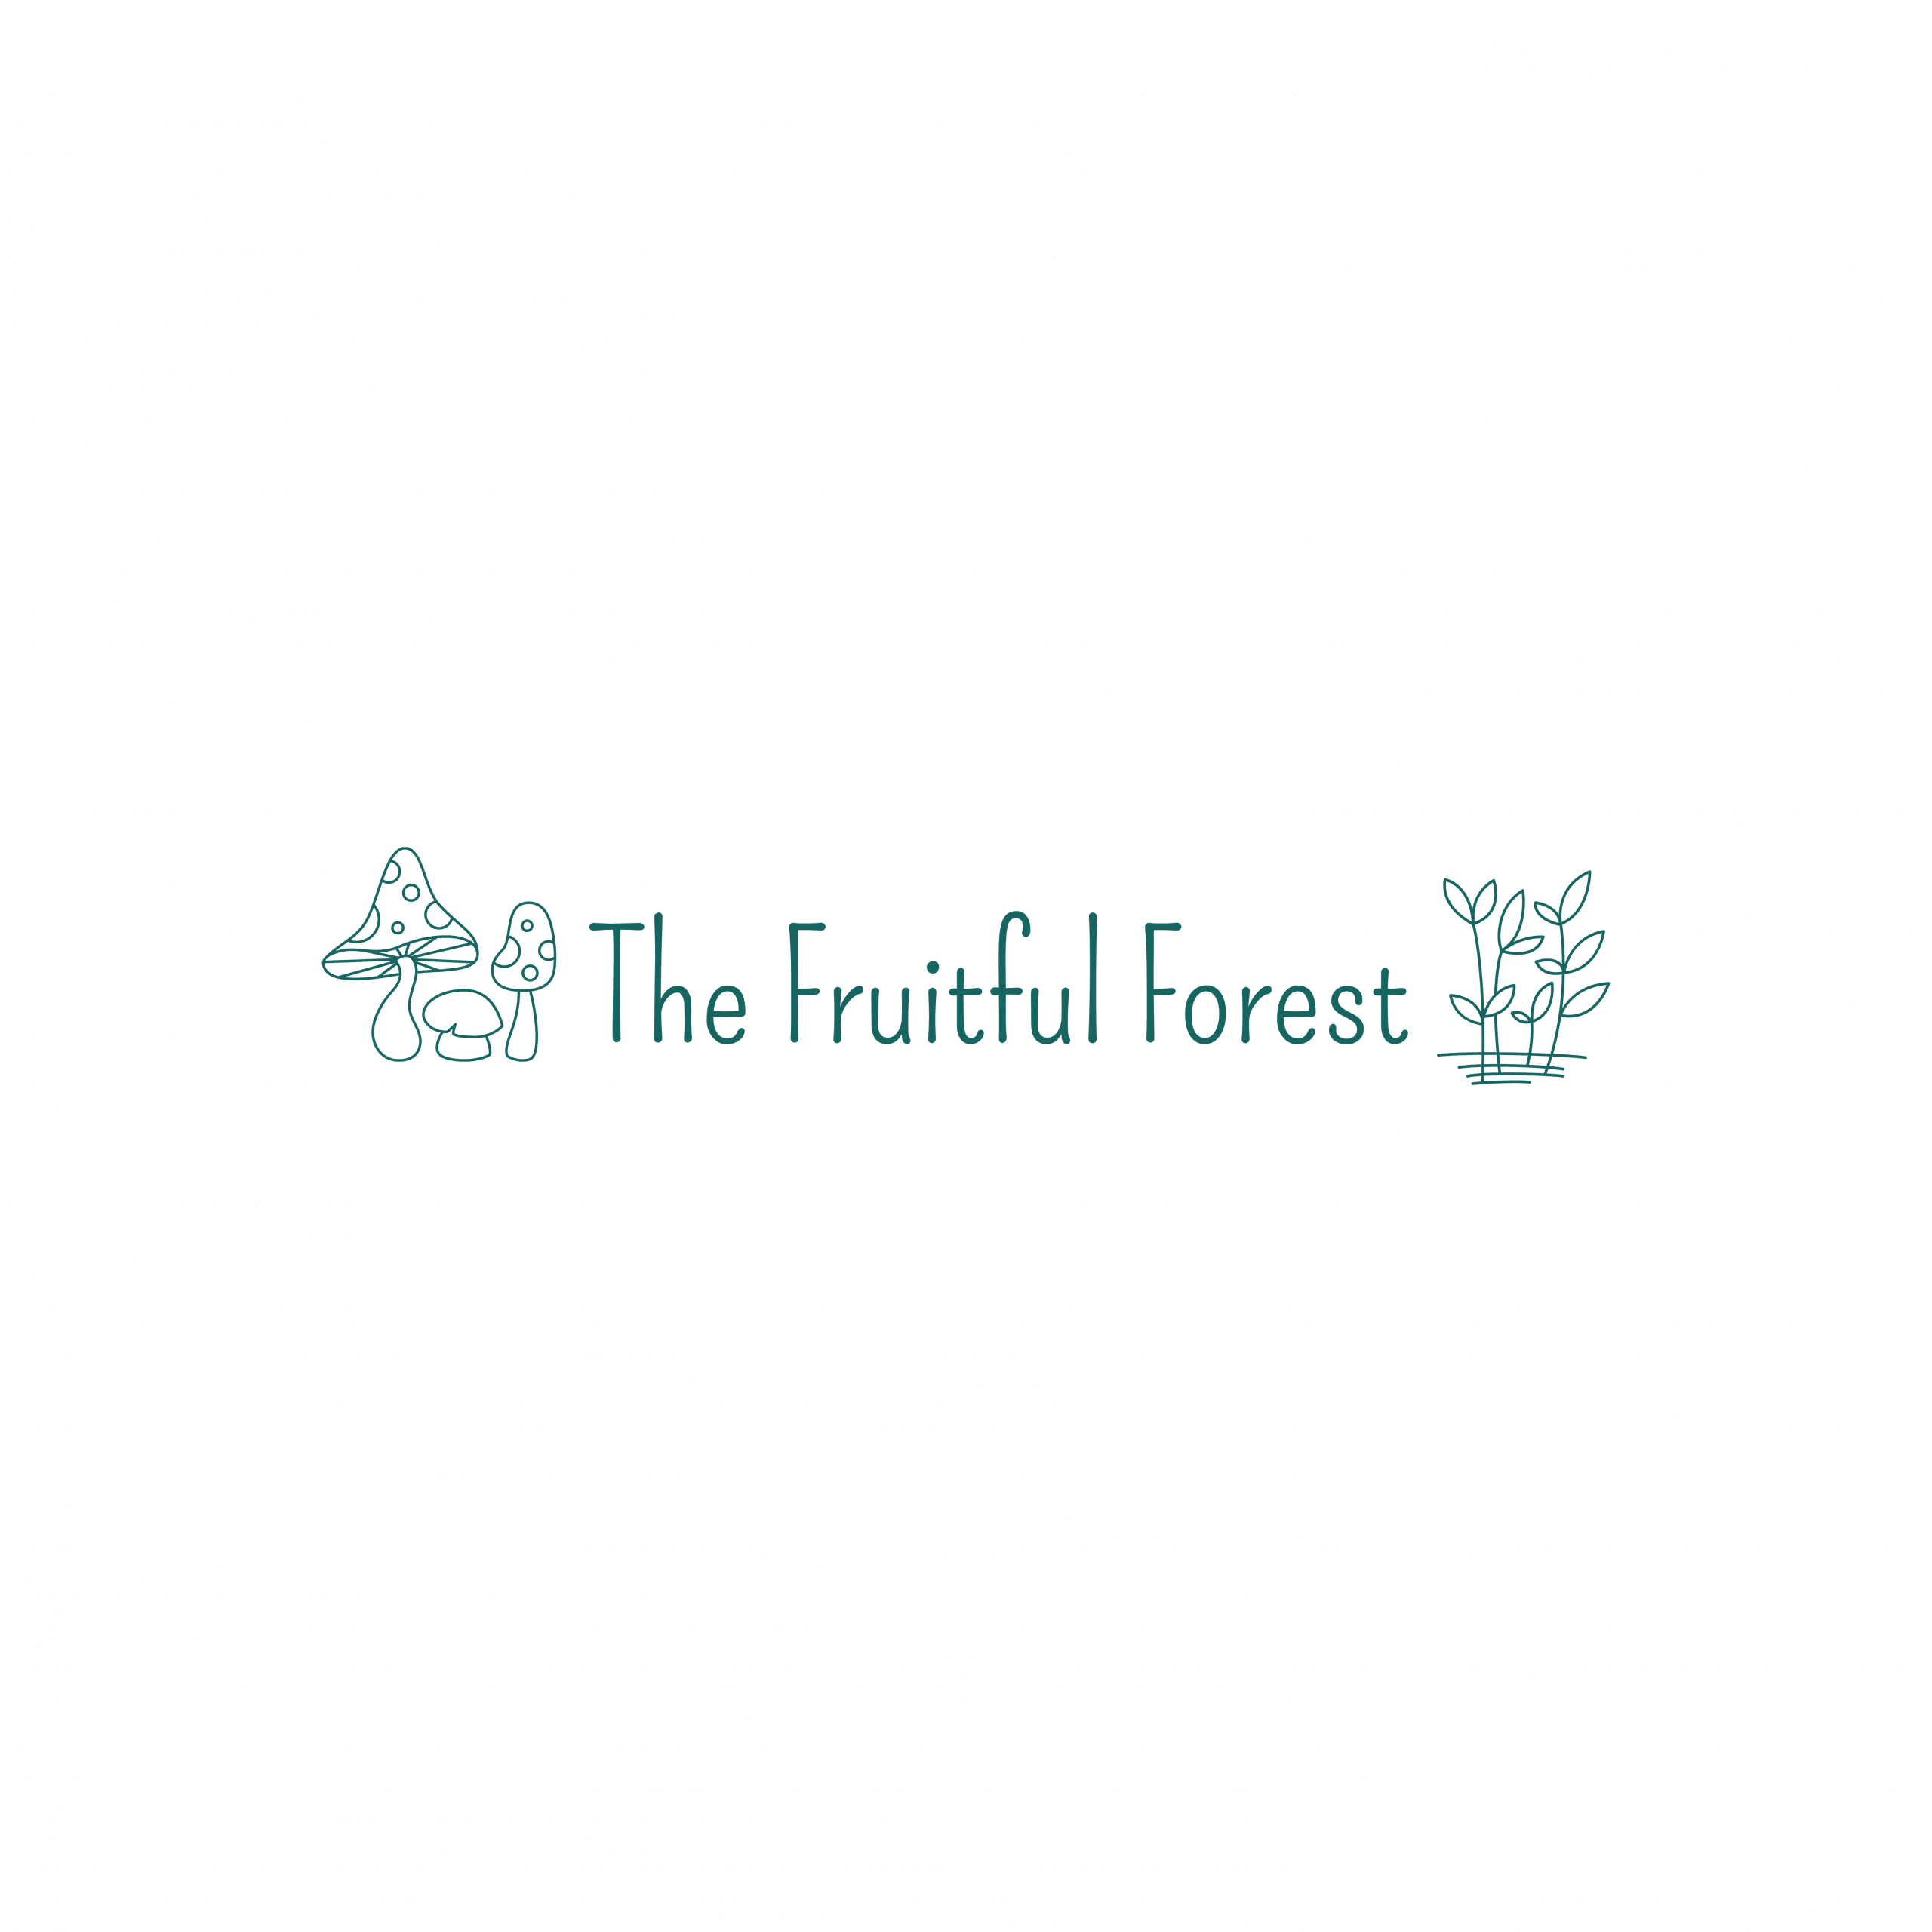 The Fruitful Forest